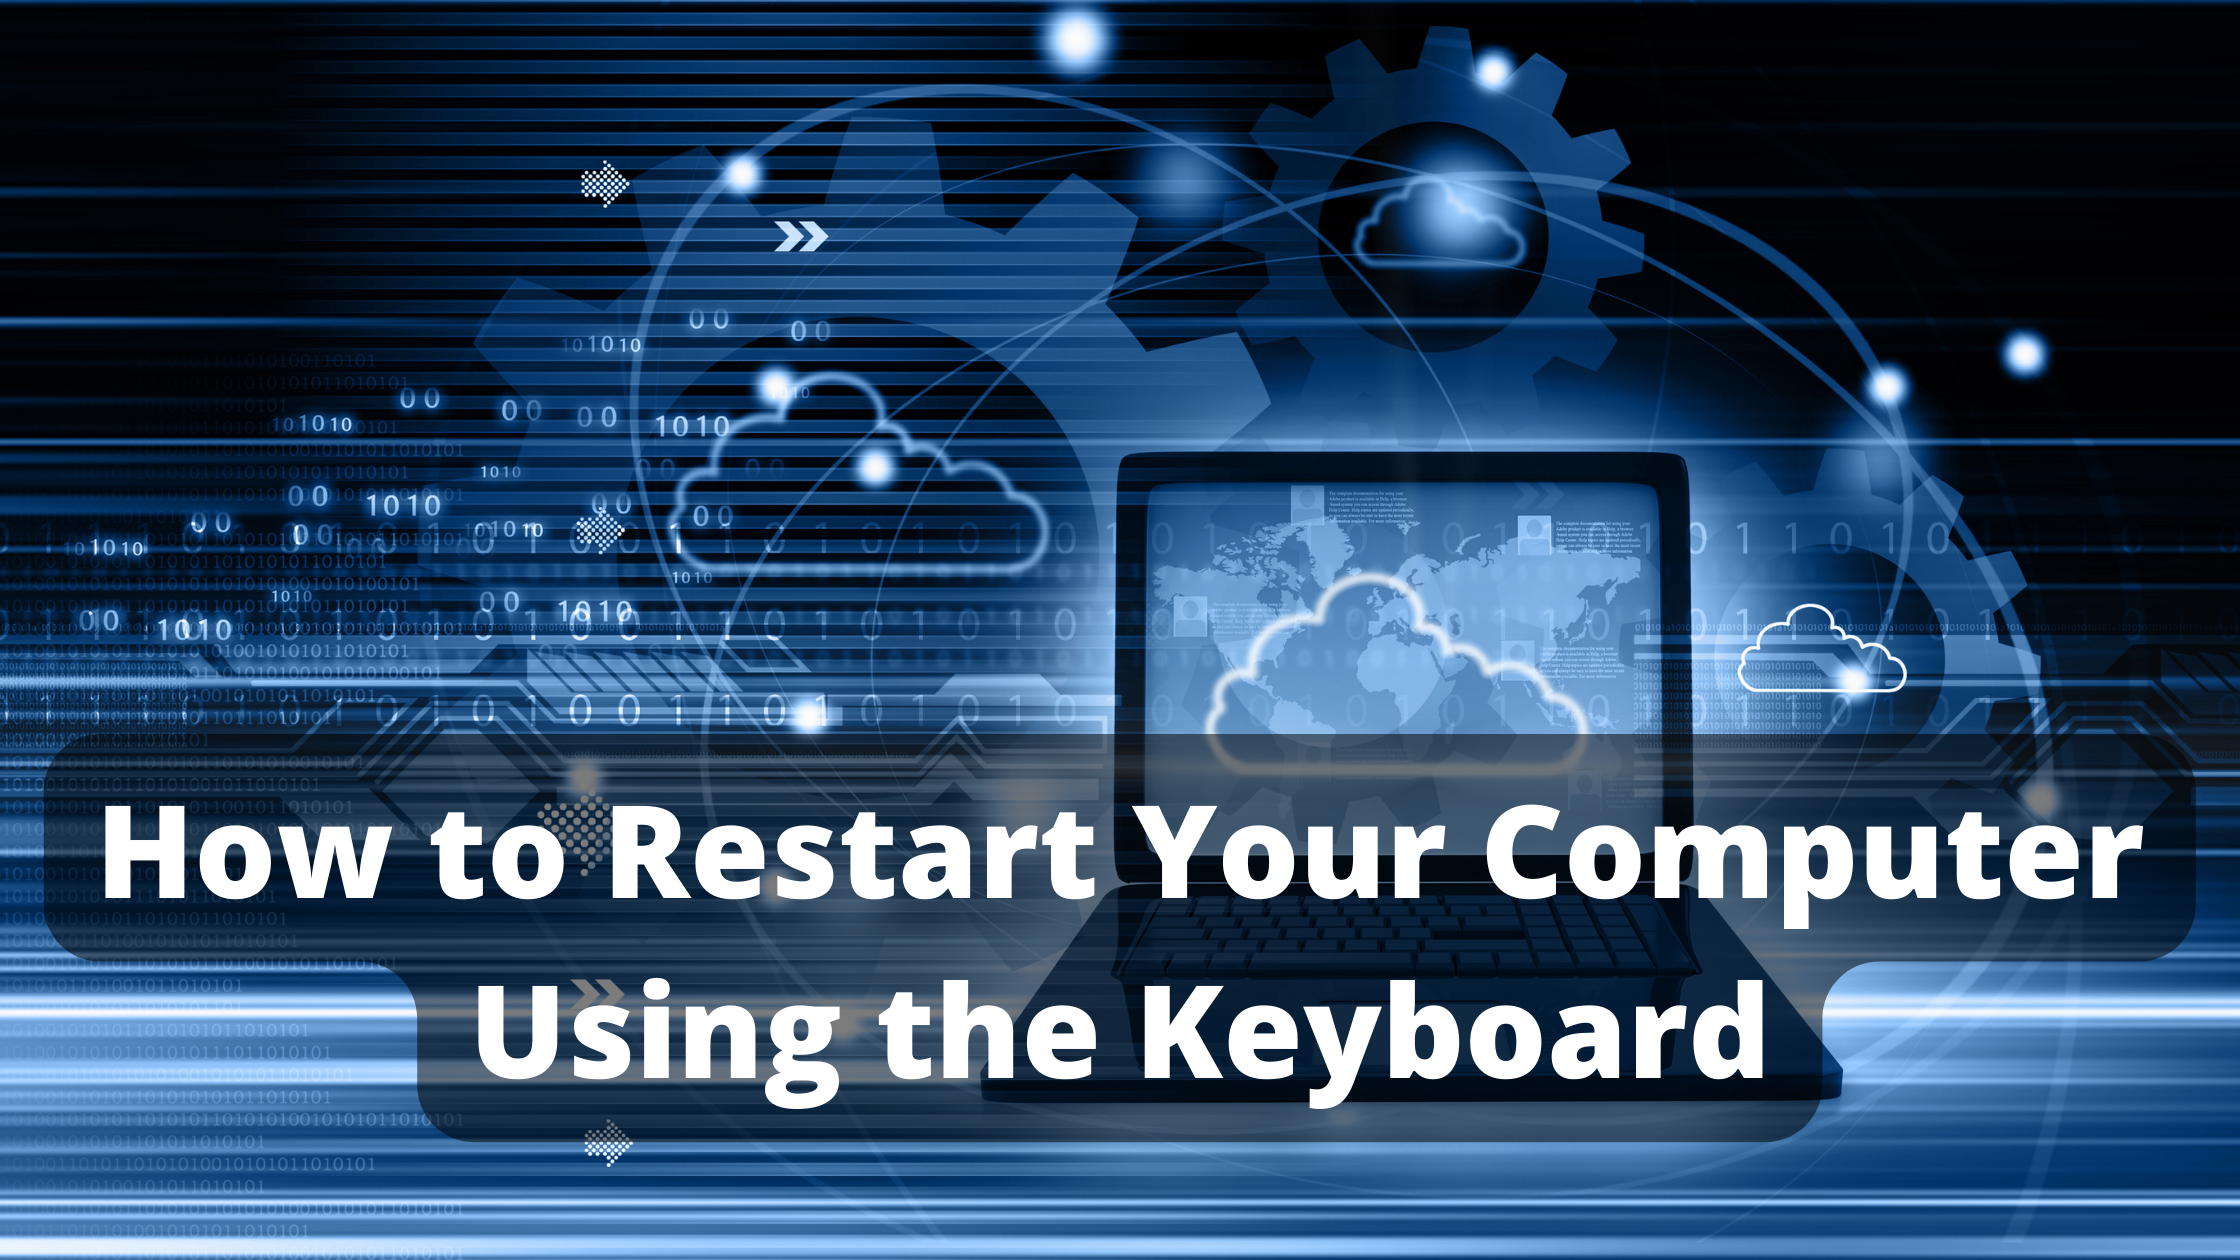 How to Restart Your Computer Using the Keyboard